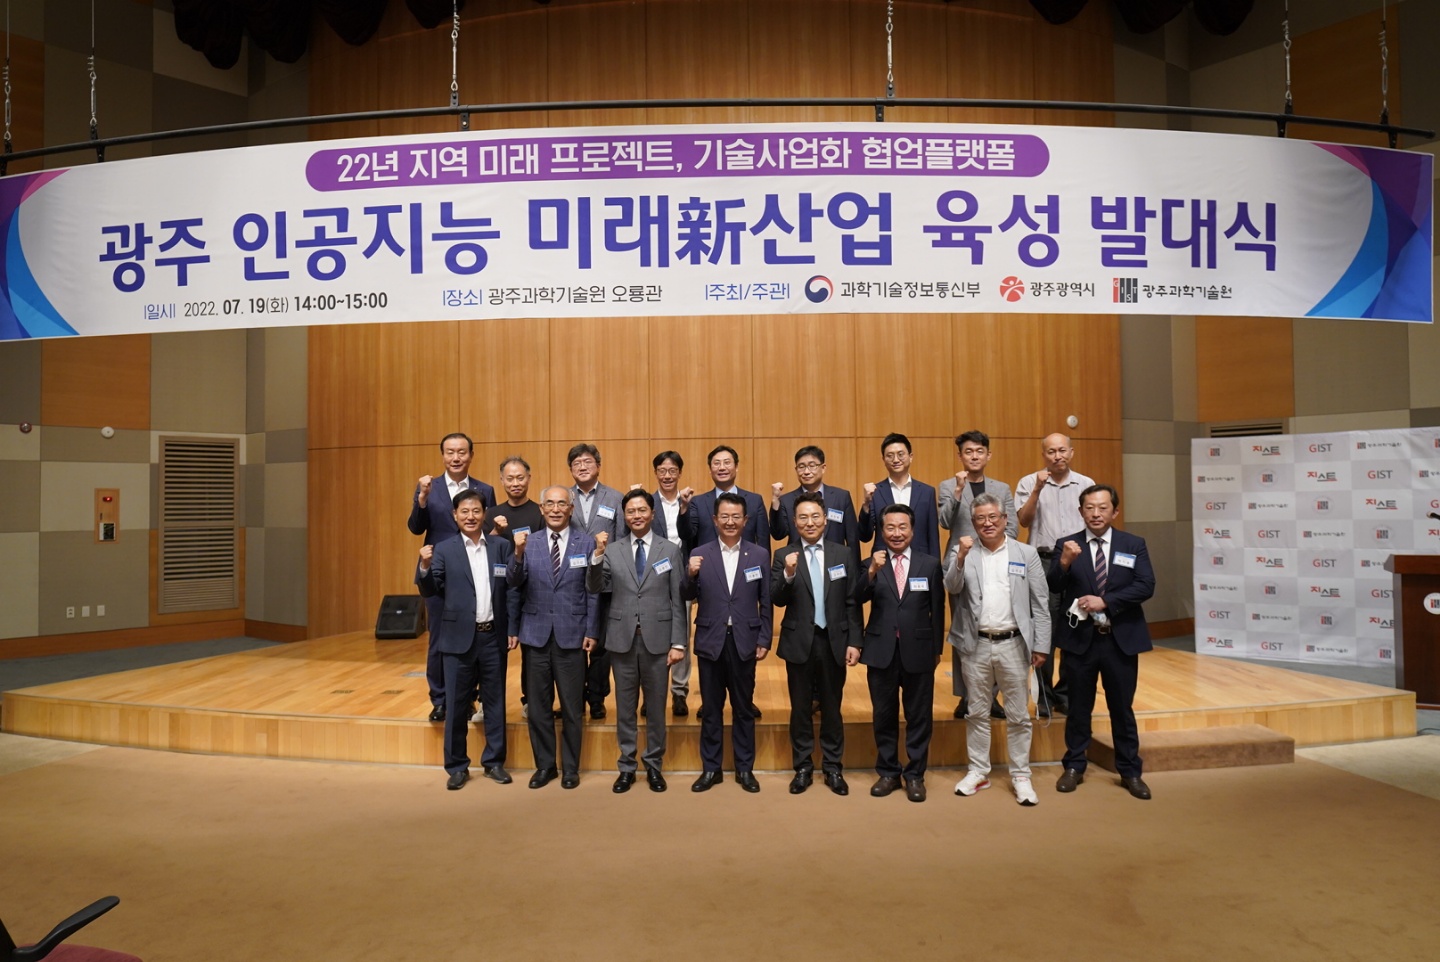 "Contribution to fostering local new industries through AI-based R&D such as Metaverse" inaugural ceremony 이미지